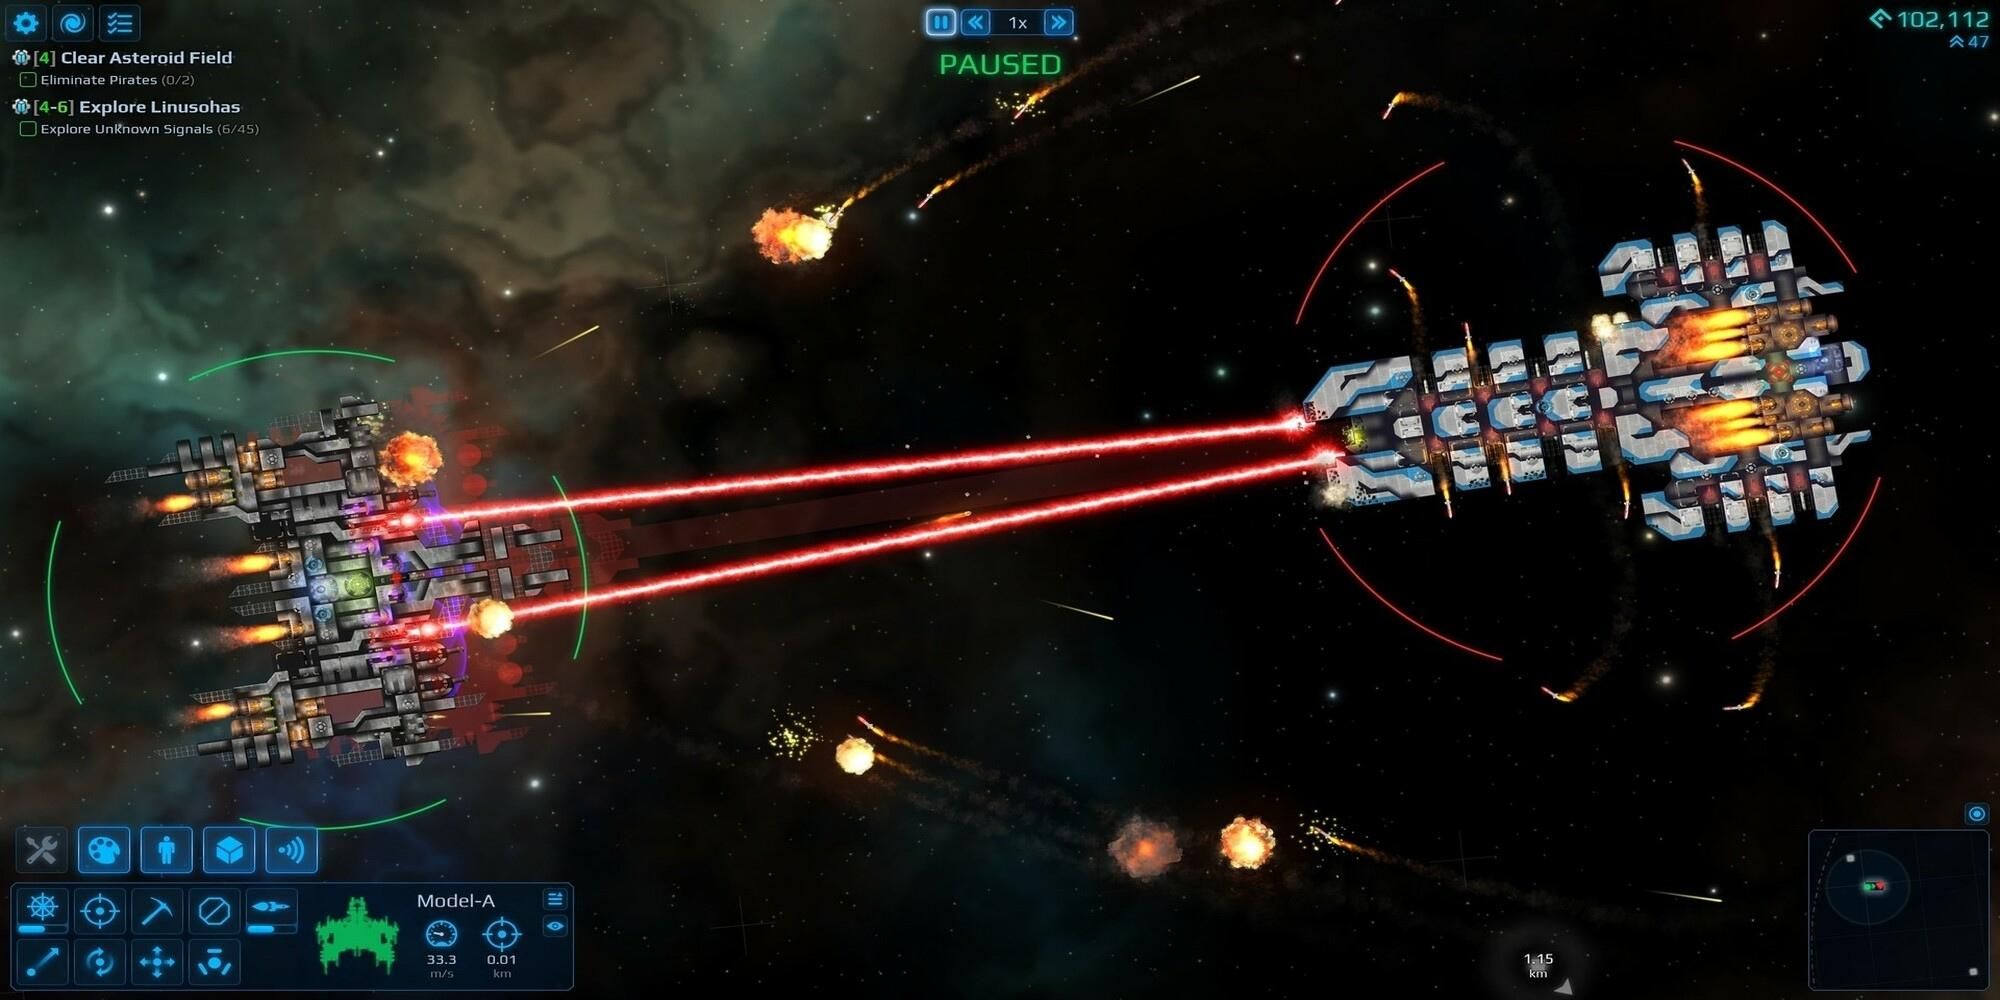 cosmoteer review image 2 combat with space pirates